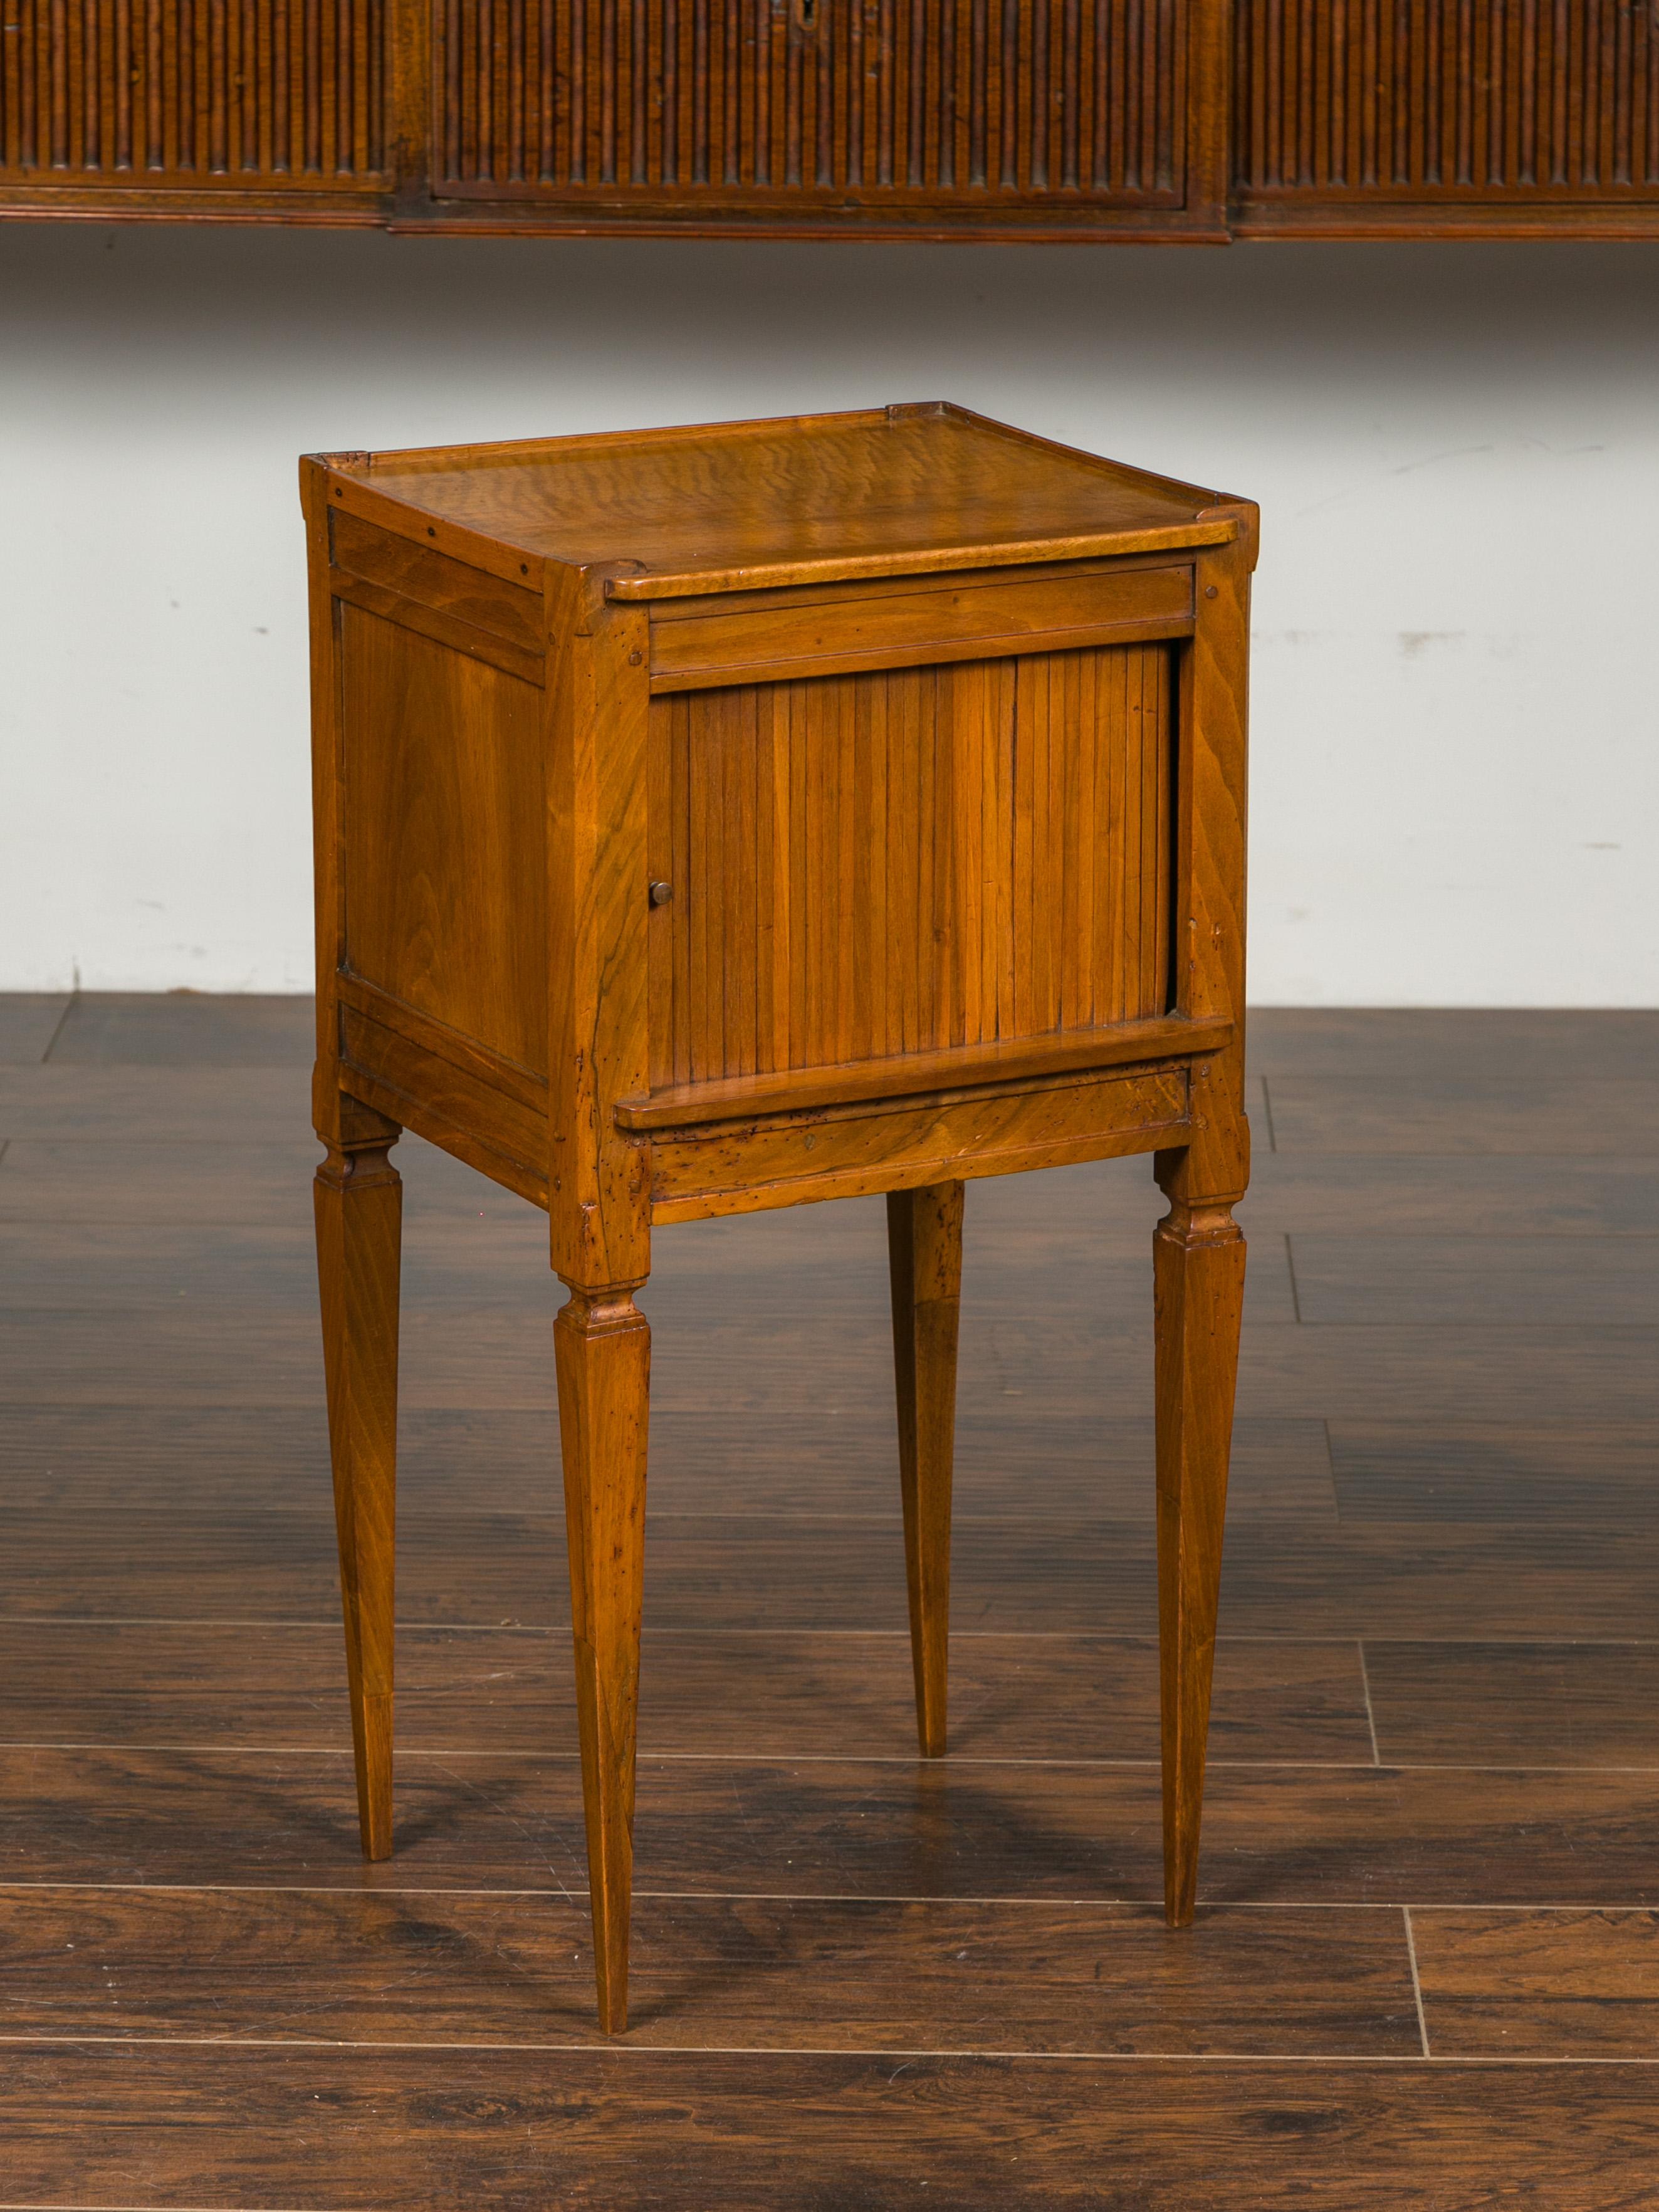 A French Napoleon III period walnut bedside table from the late 19th century, with tambour door and tapered legs. Born in France during the third quarter of the 19th century, this walnut side table features a rectangular top with slightly raised